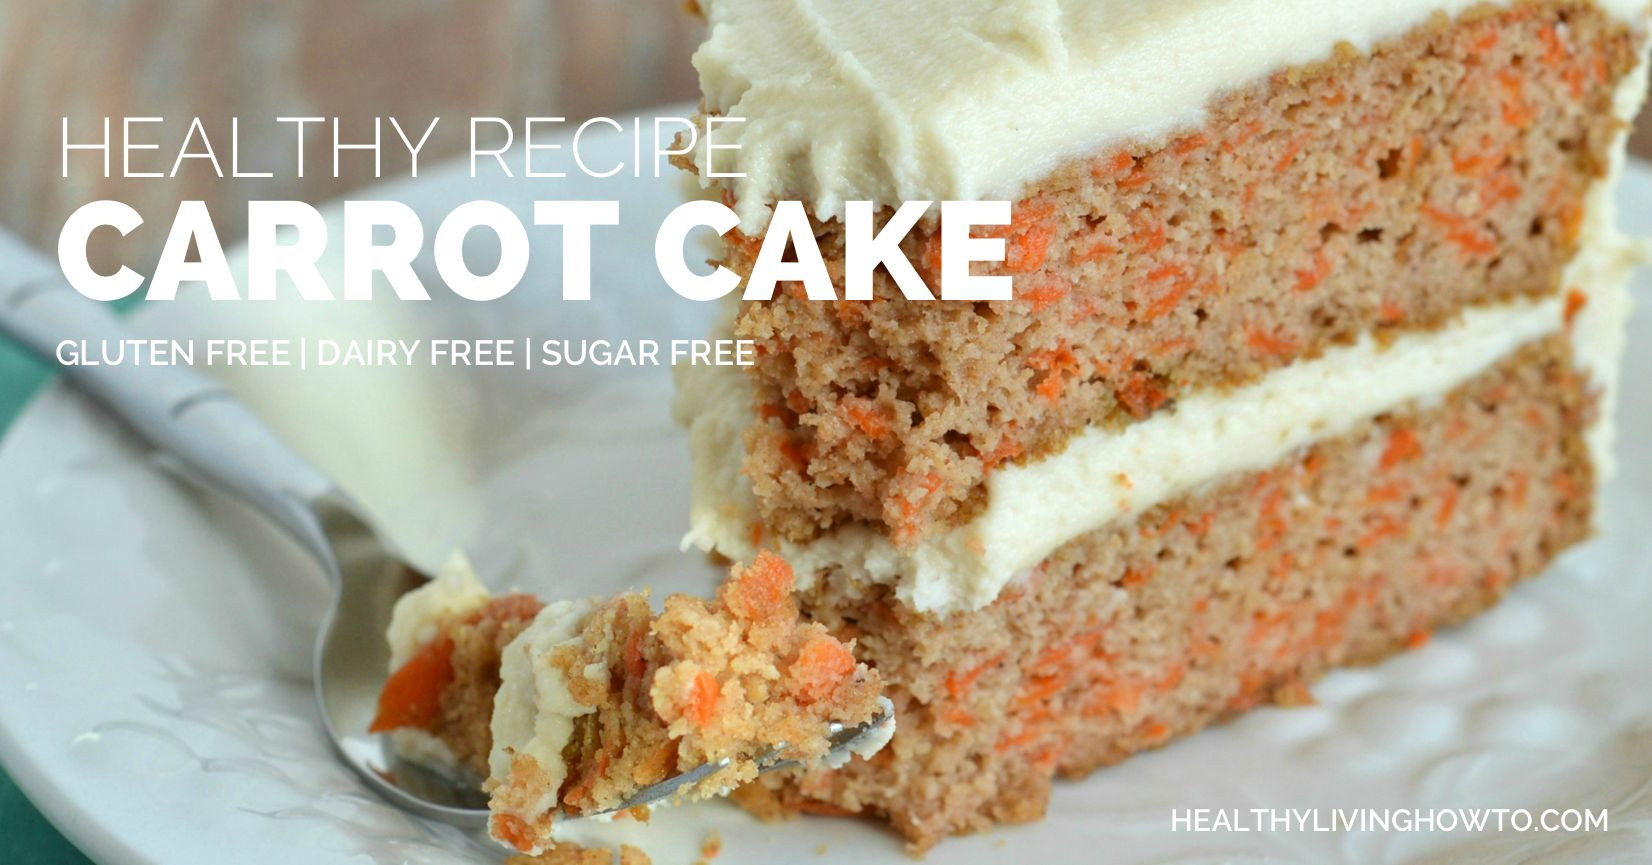 Is Carrot Cake Healthy
 Carrot Cake Healthy Living How To